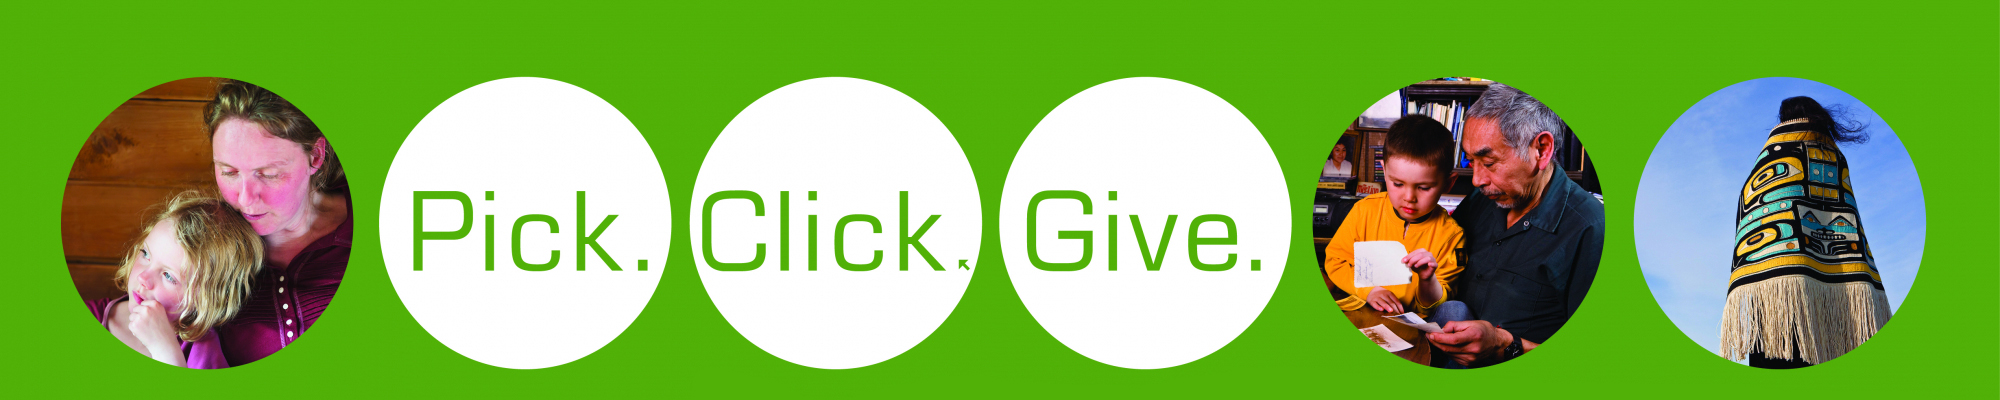 Pick. Click. Give. Support the United Way of Southeast Alaska.